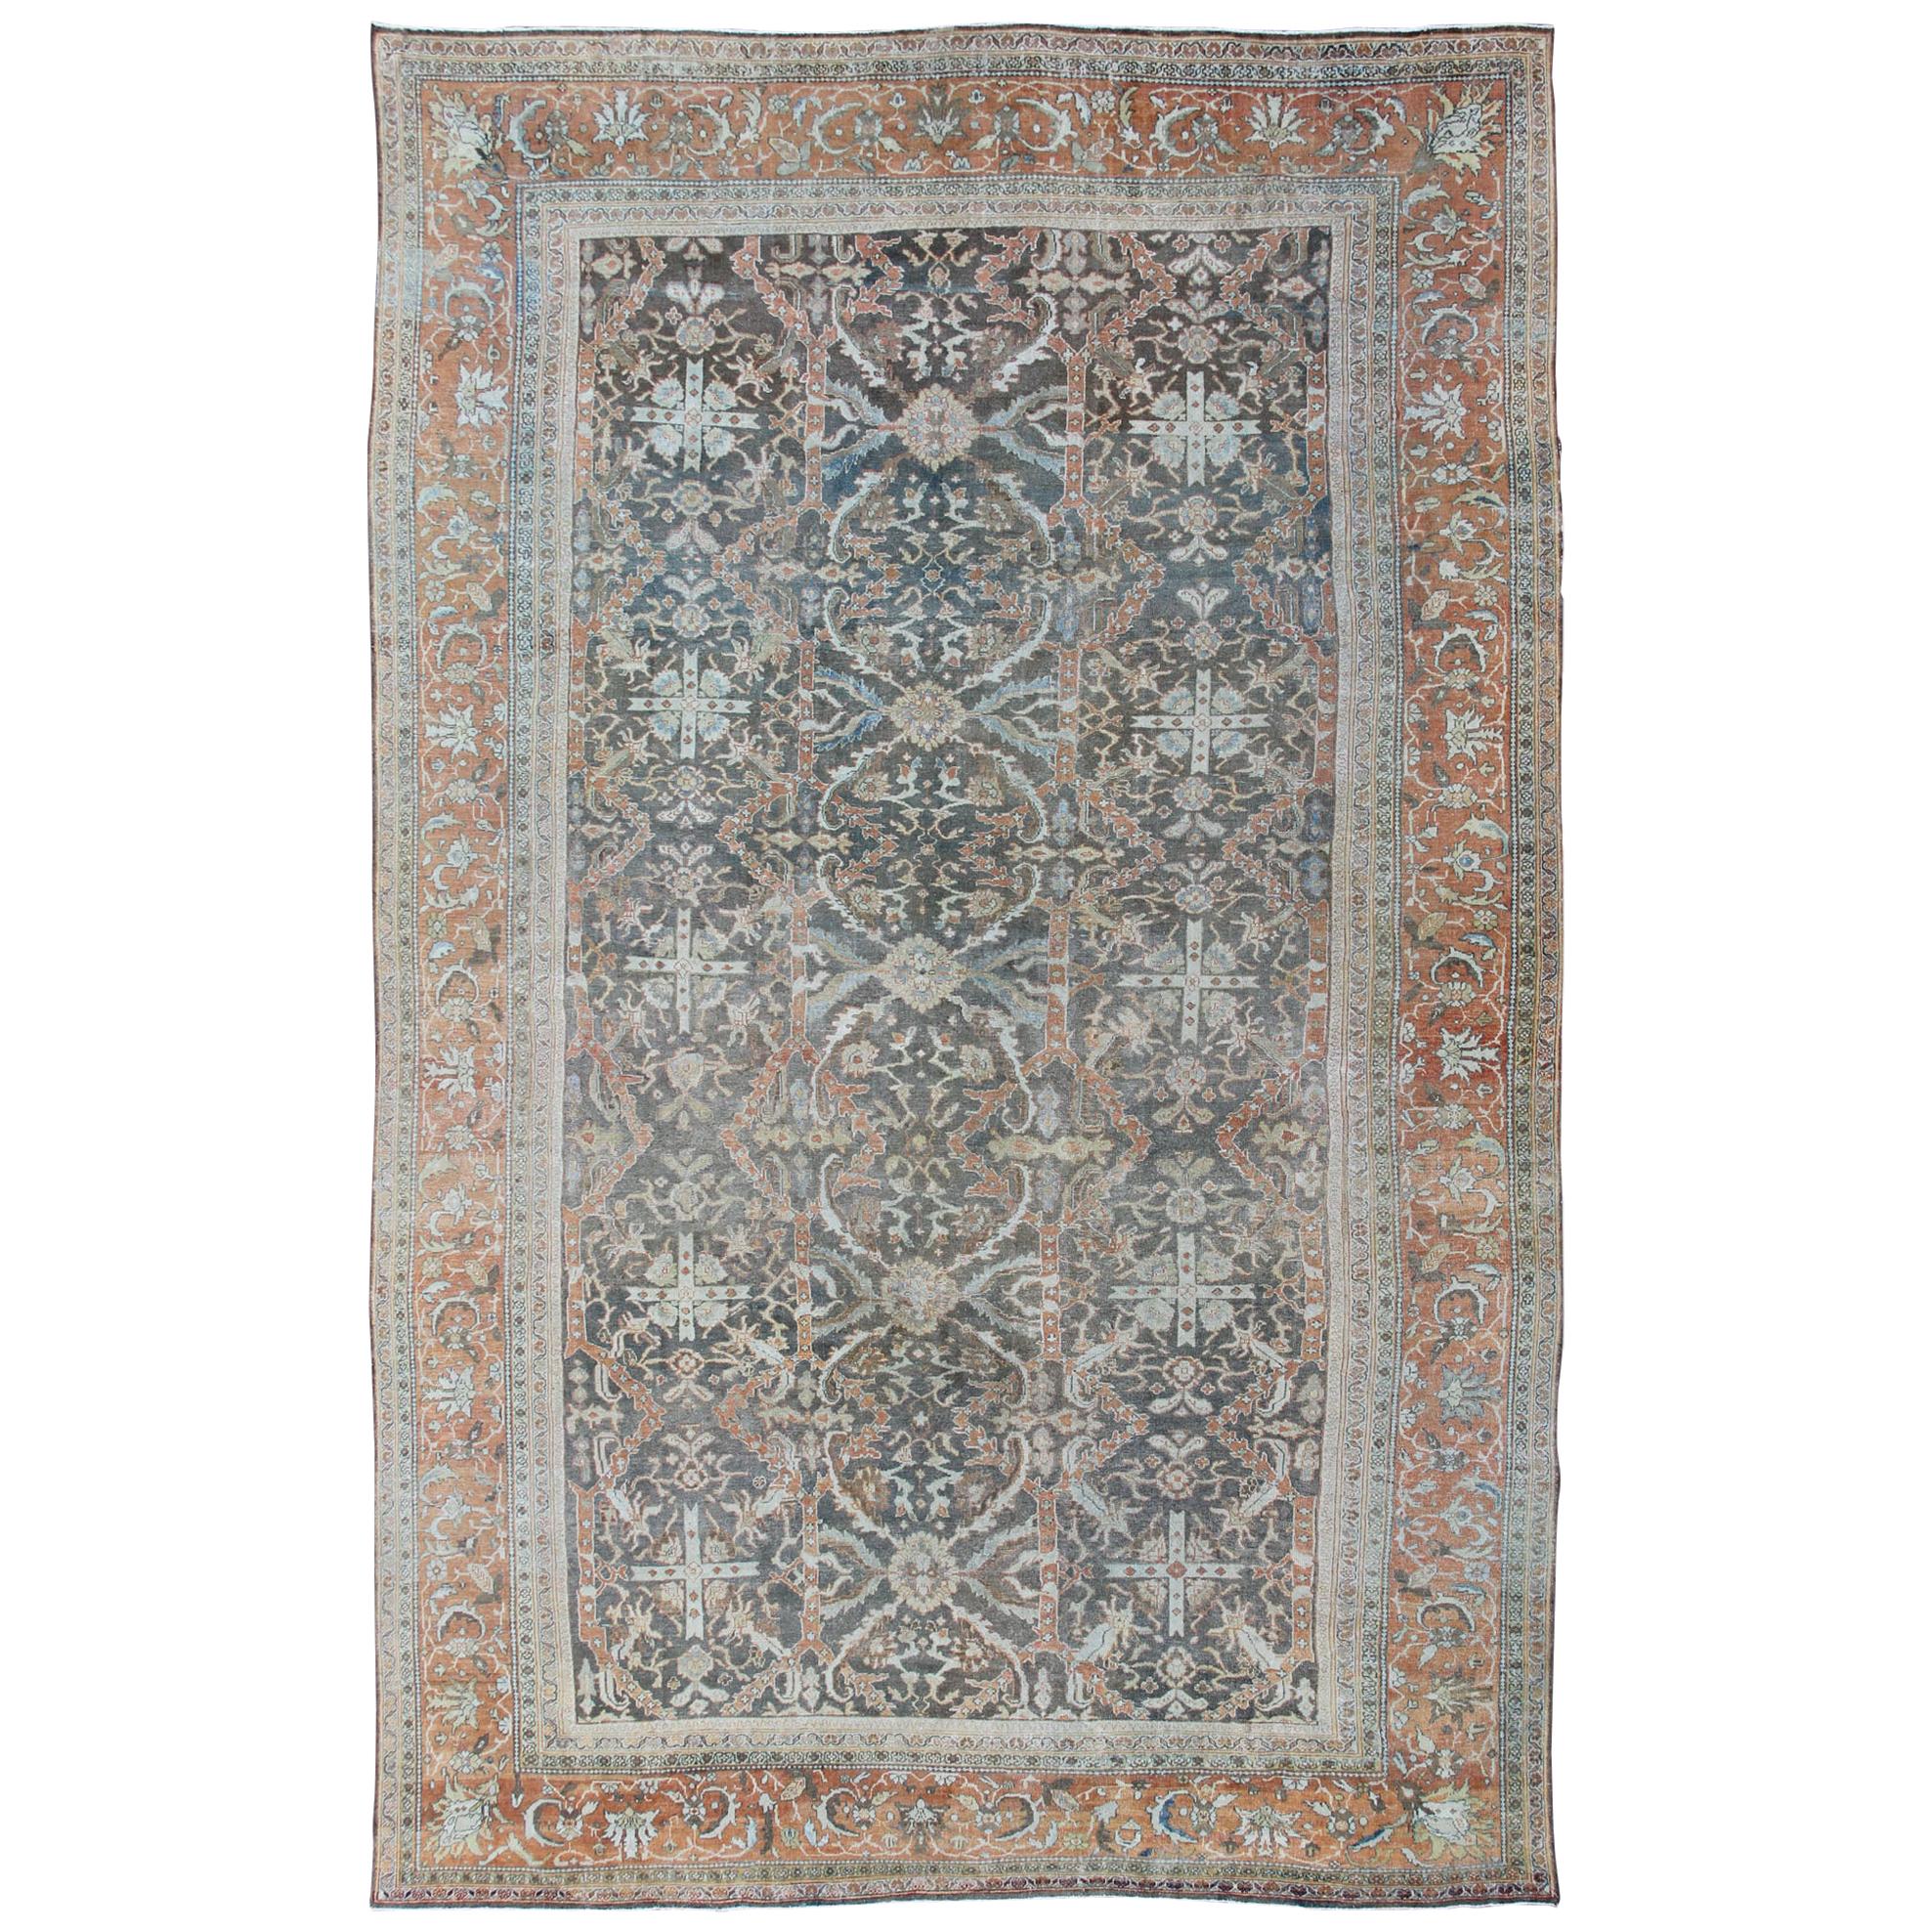 Large Antique Persian Sultanabad Rug in Gray, Charcoal, Burnt Orange, Acid Green